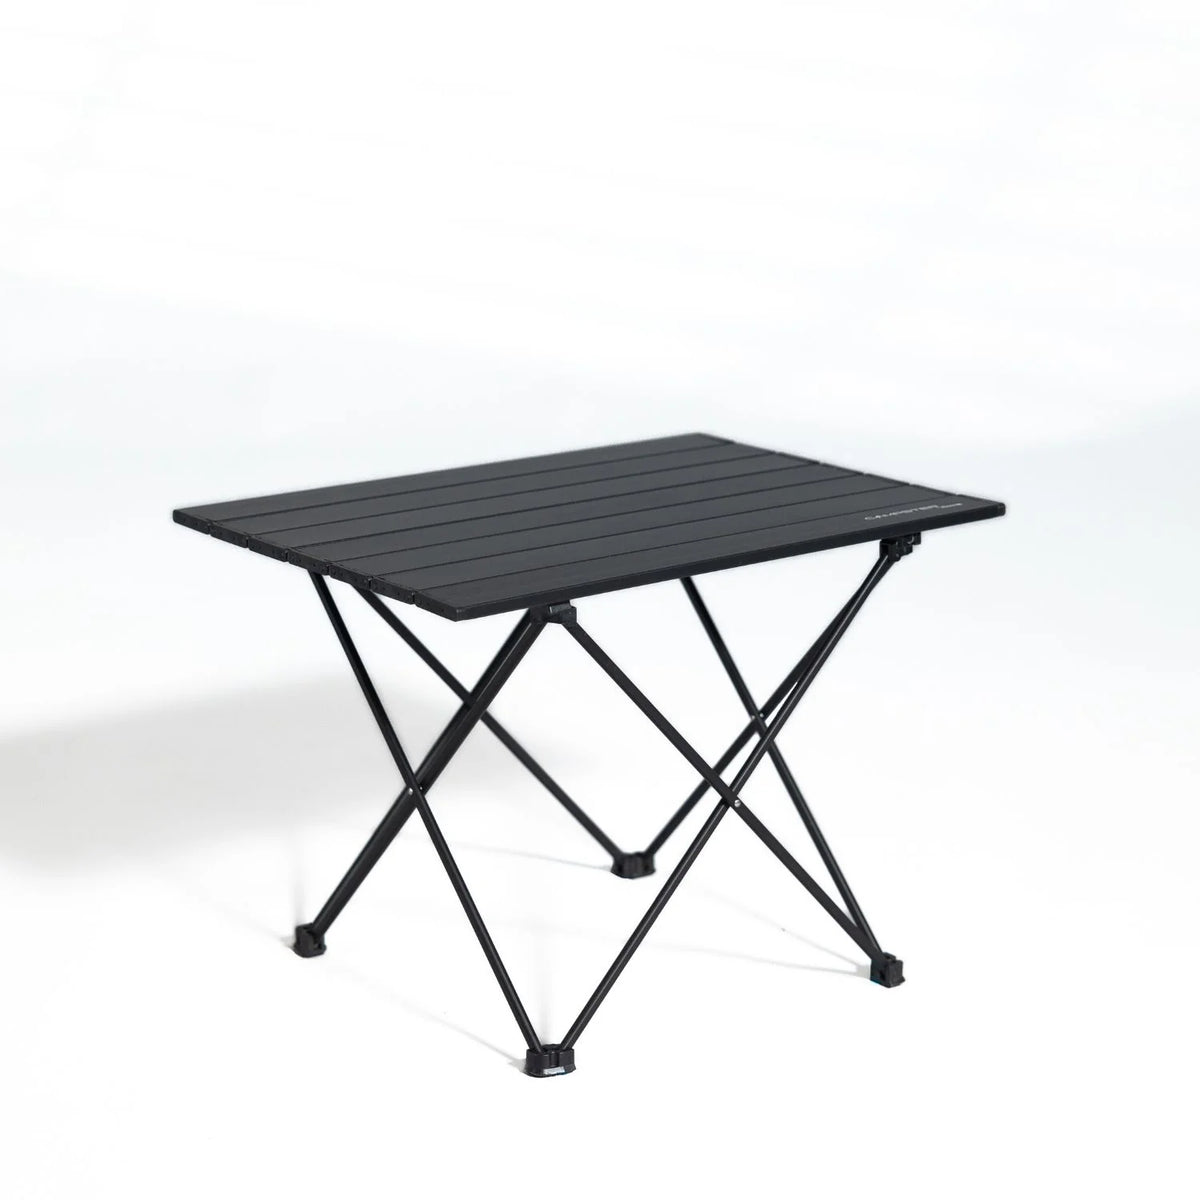 Campster Folding Aluminum Table